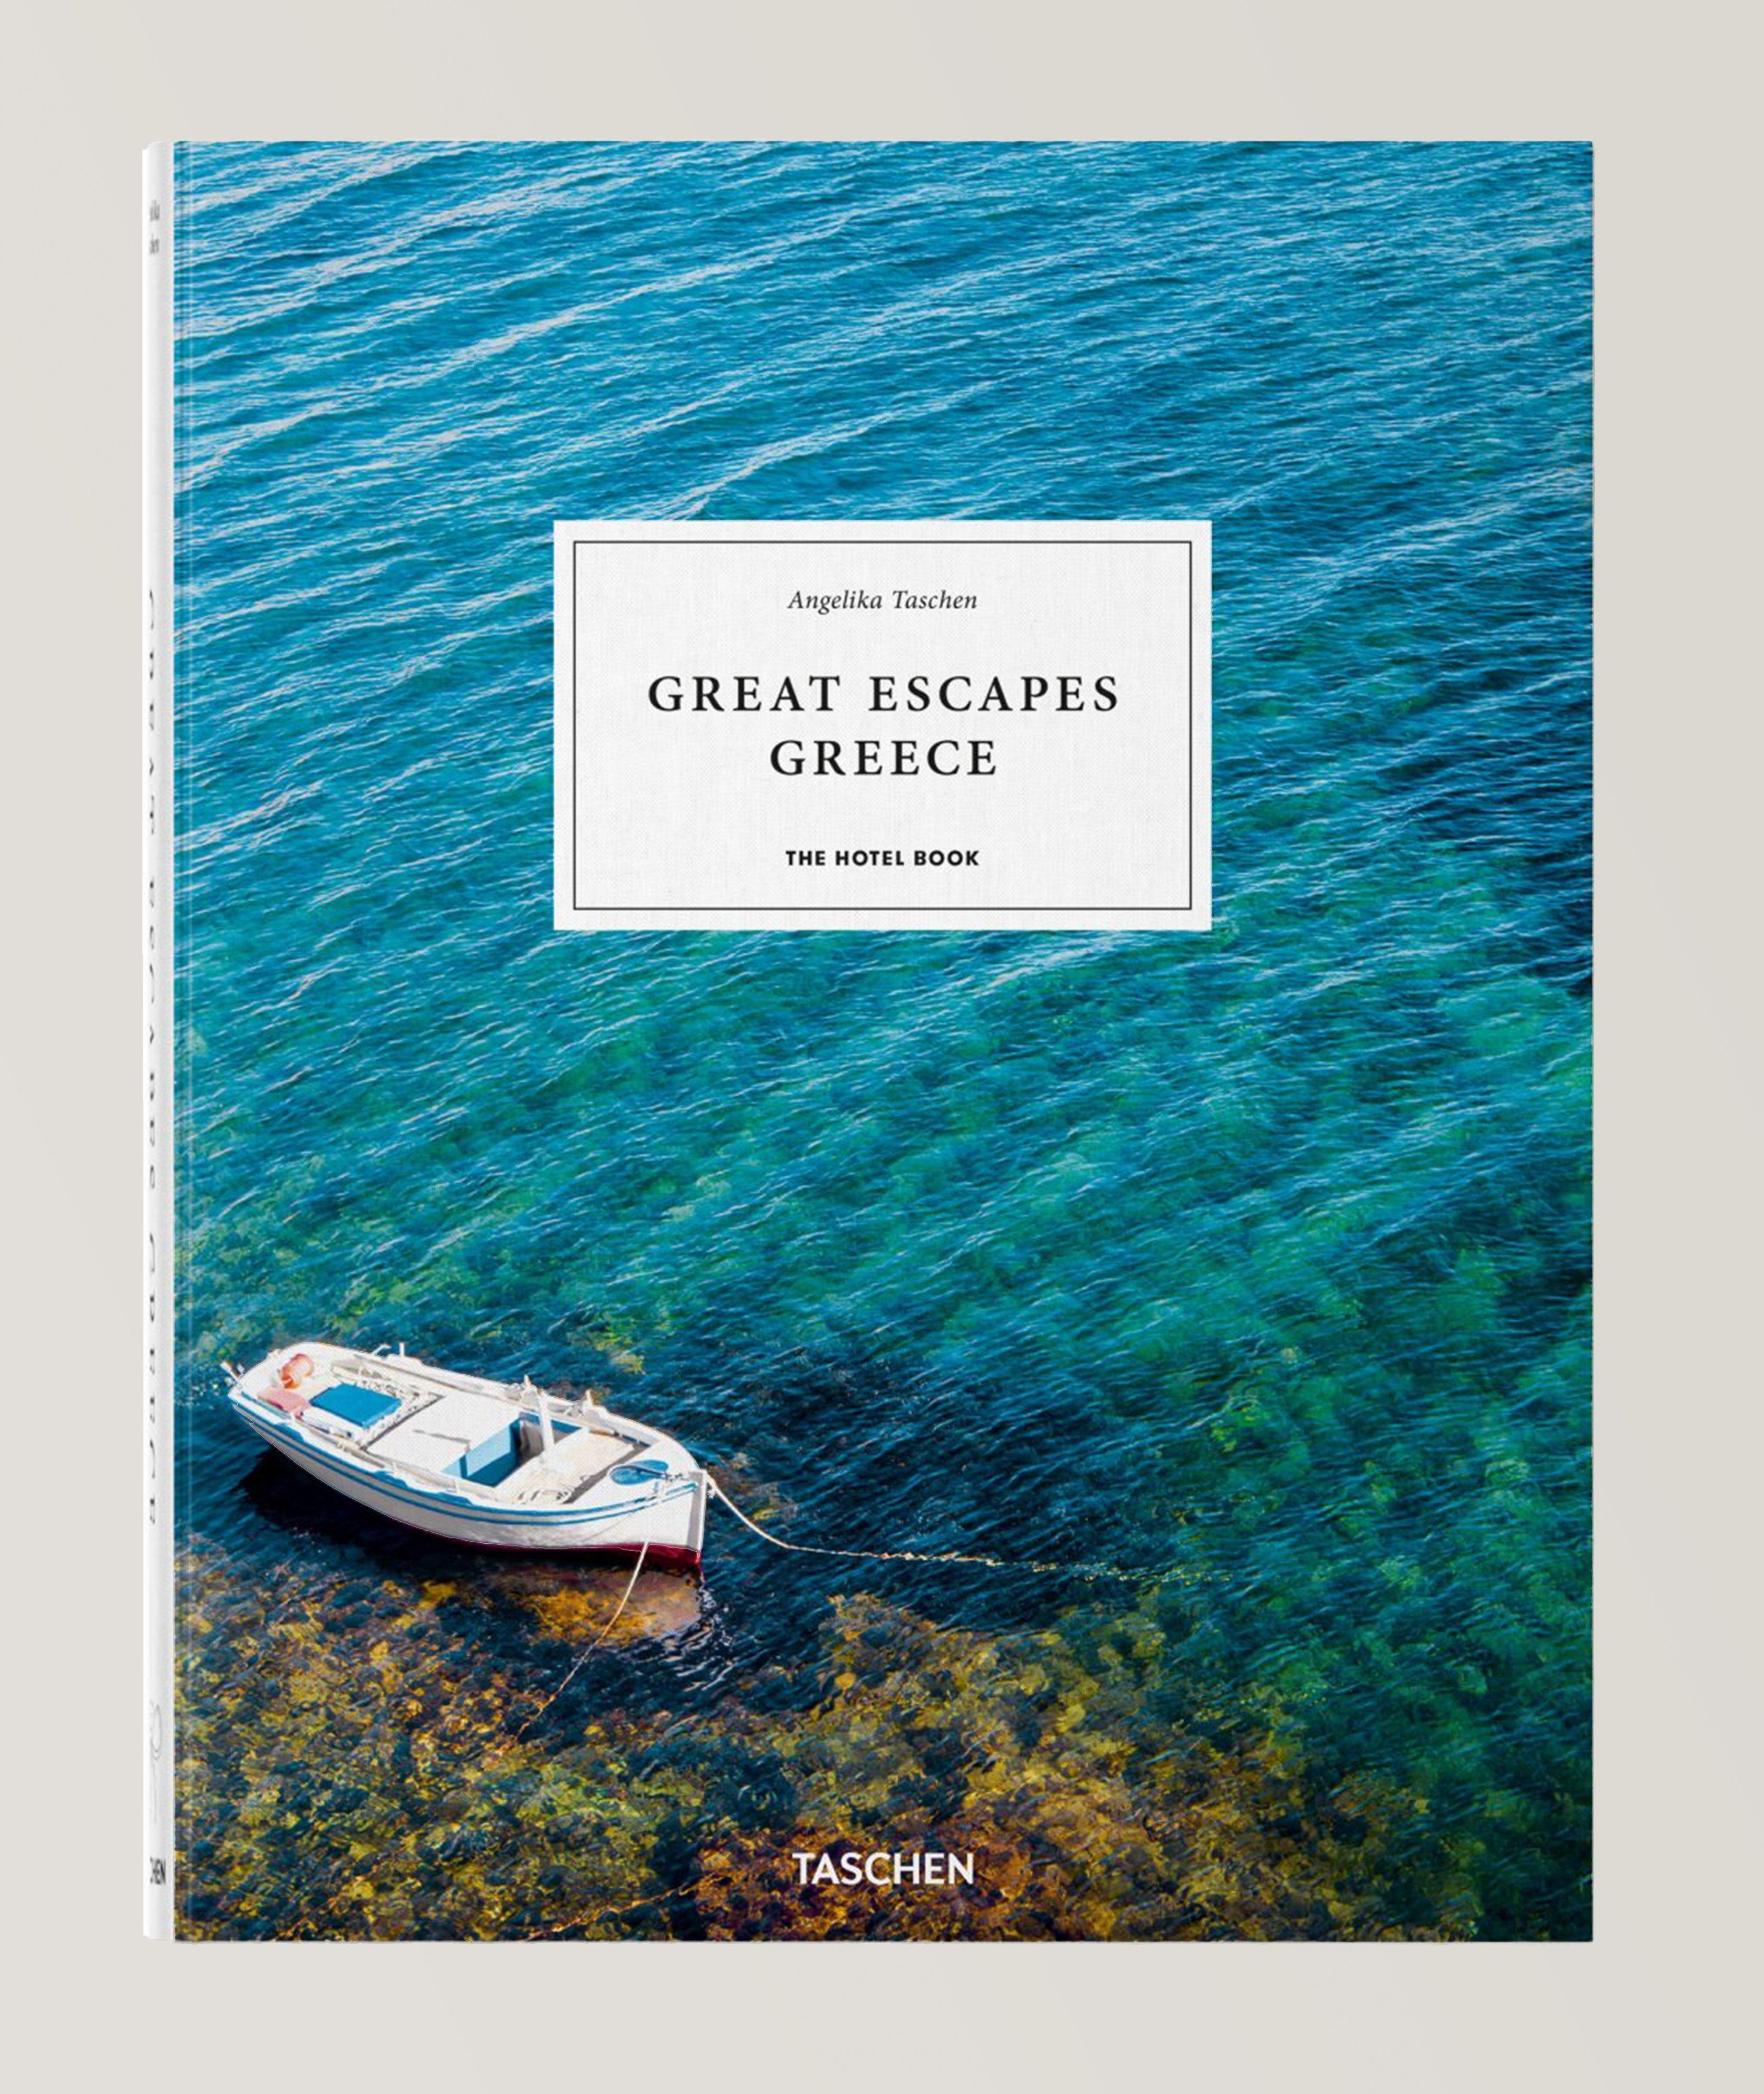 Great Escapes Greece. The Hotel Book image 0